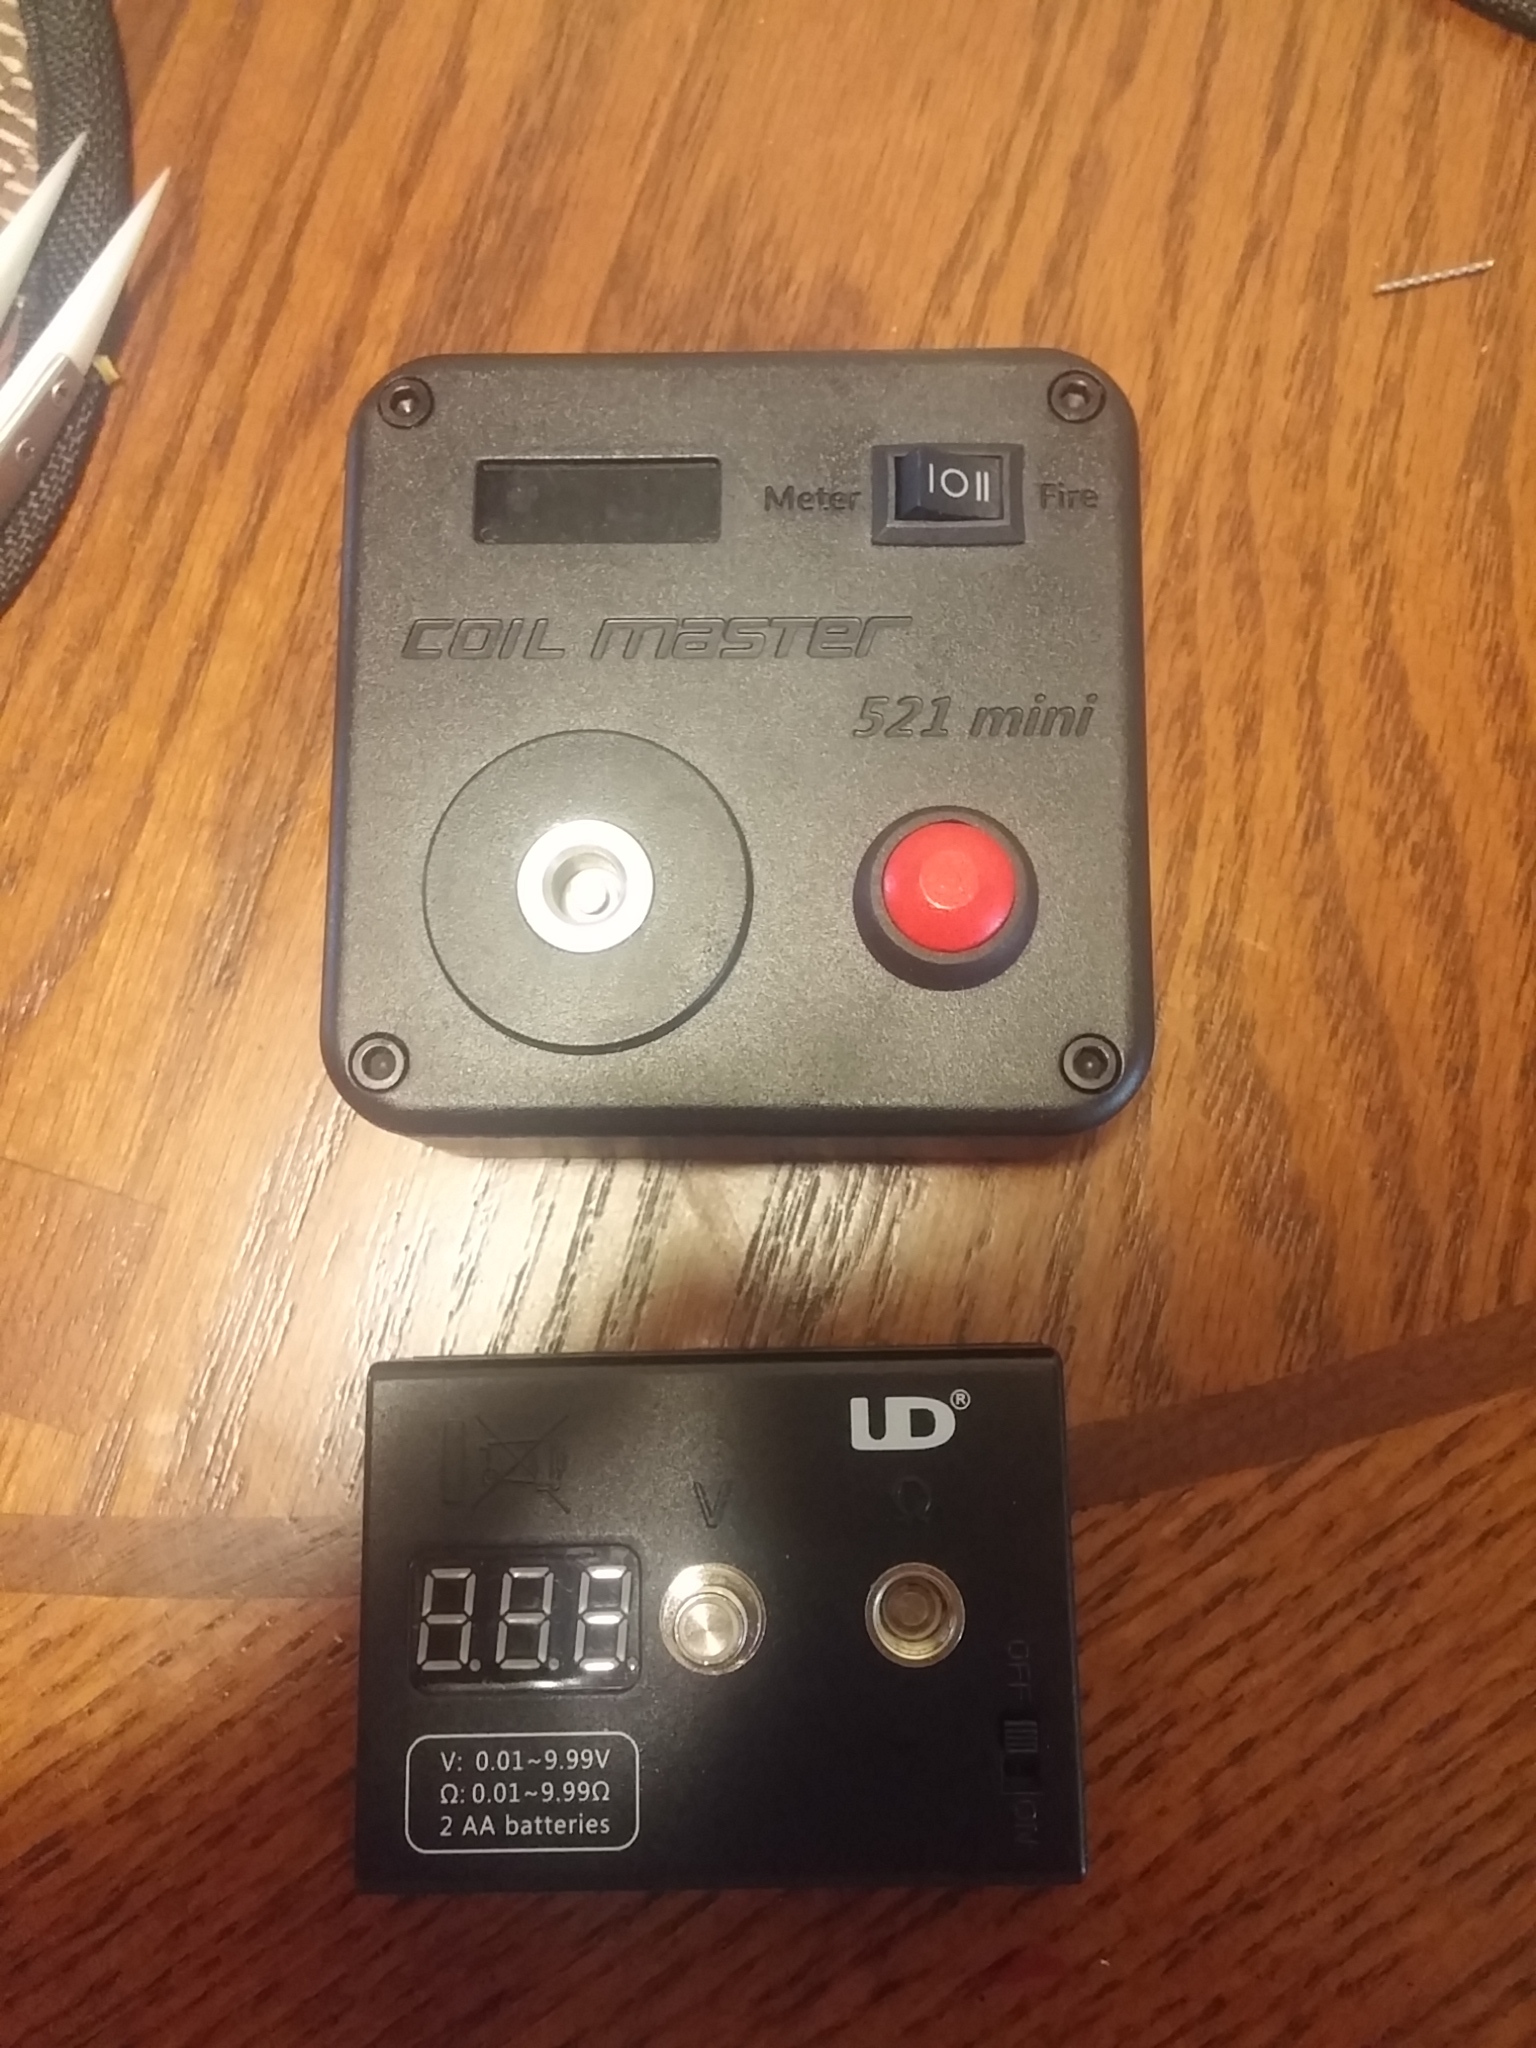 Coil master 521 mini tab - Batteries and Chargers - E-Liquid Recipes Forum